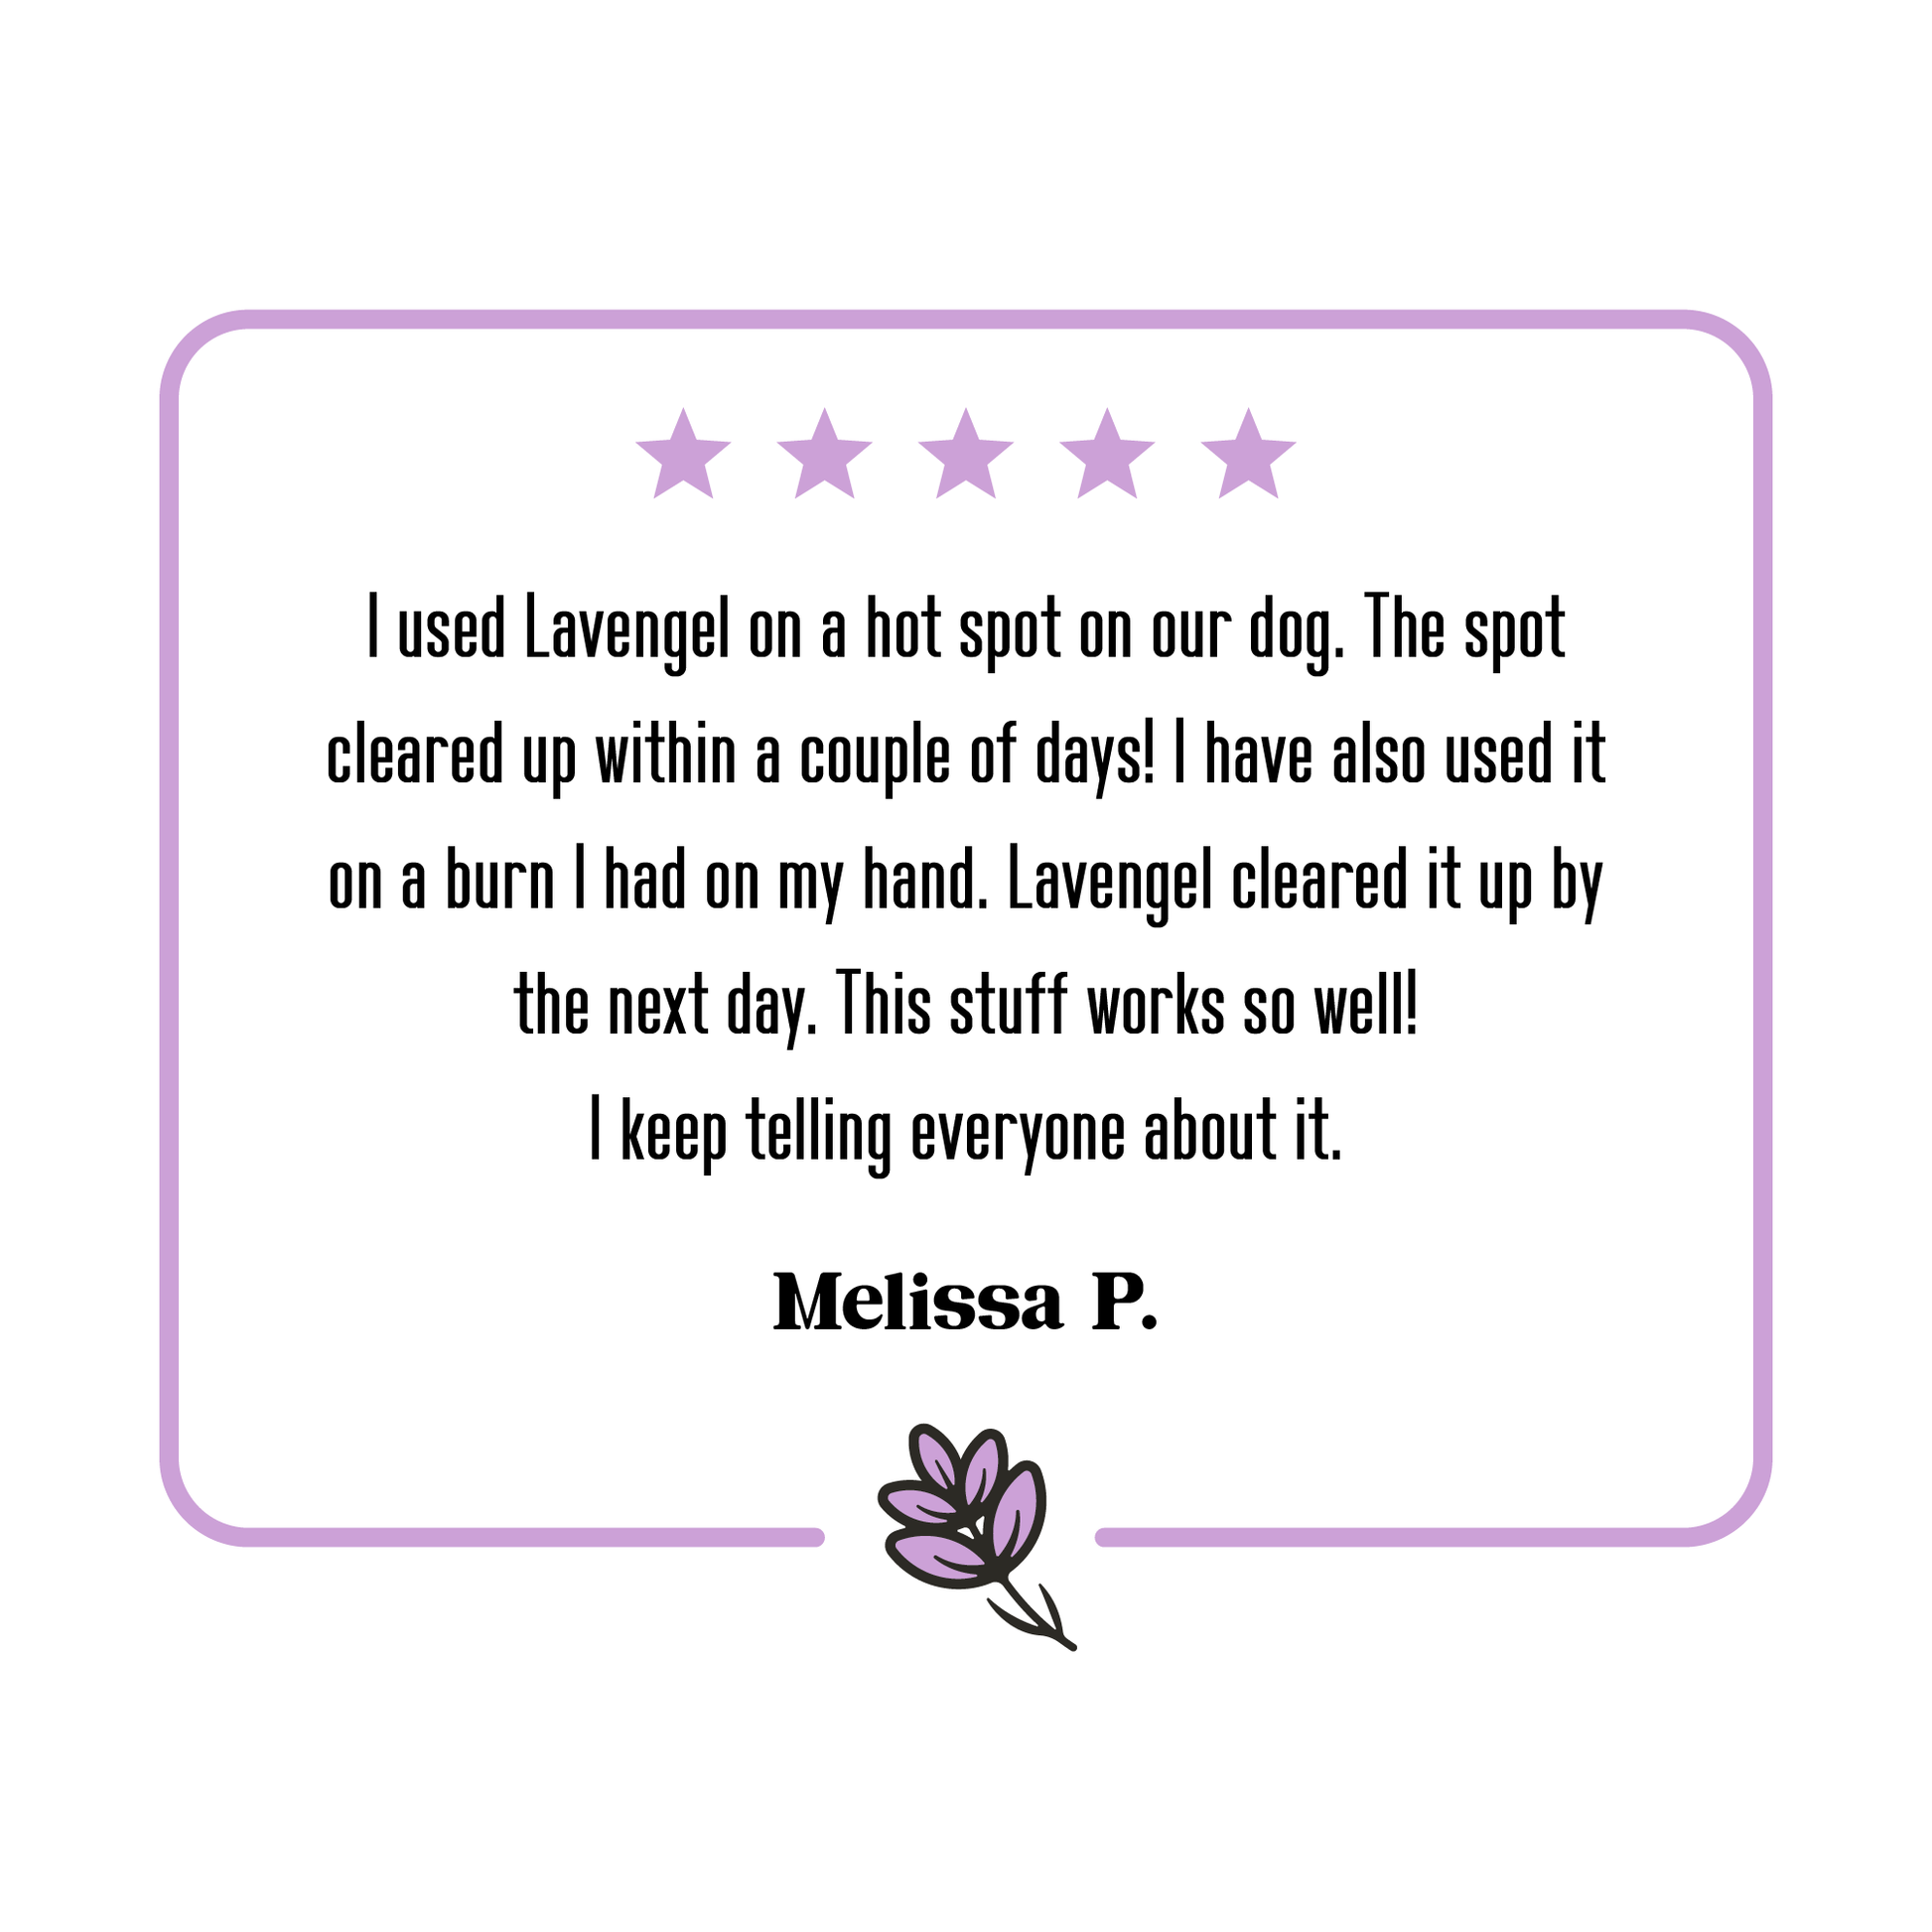 5-star Lavengel review from Melissa that reads: 'I used Lavengel on a hot spot on our dog. The spot cleared up within a couple of days! I have also used it on a burn I had on my hand. Lavengel cleared it up by the next day. This stuff works so well! I keep telling everyone about it.'!